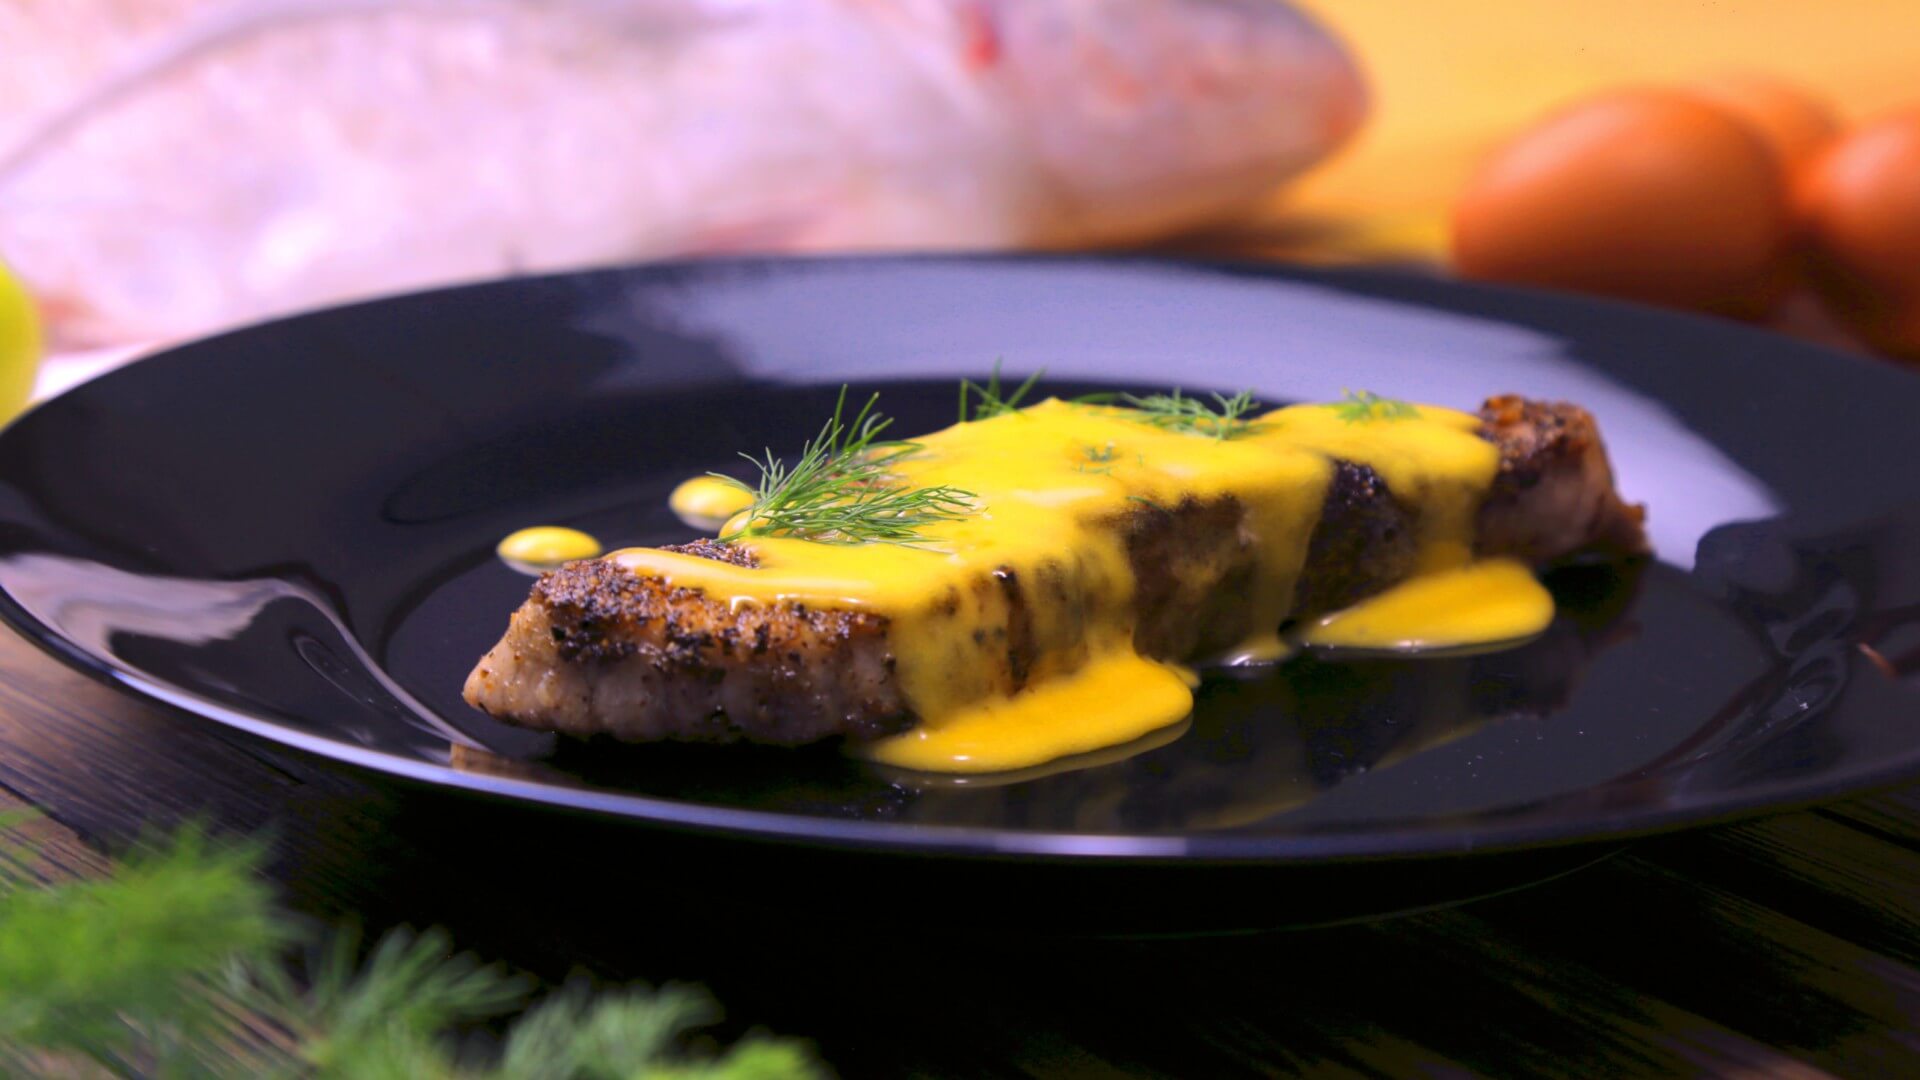  Grilled fish with hollandaise